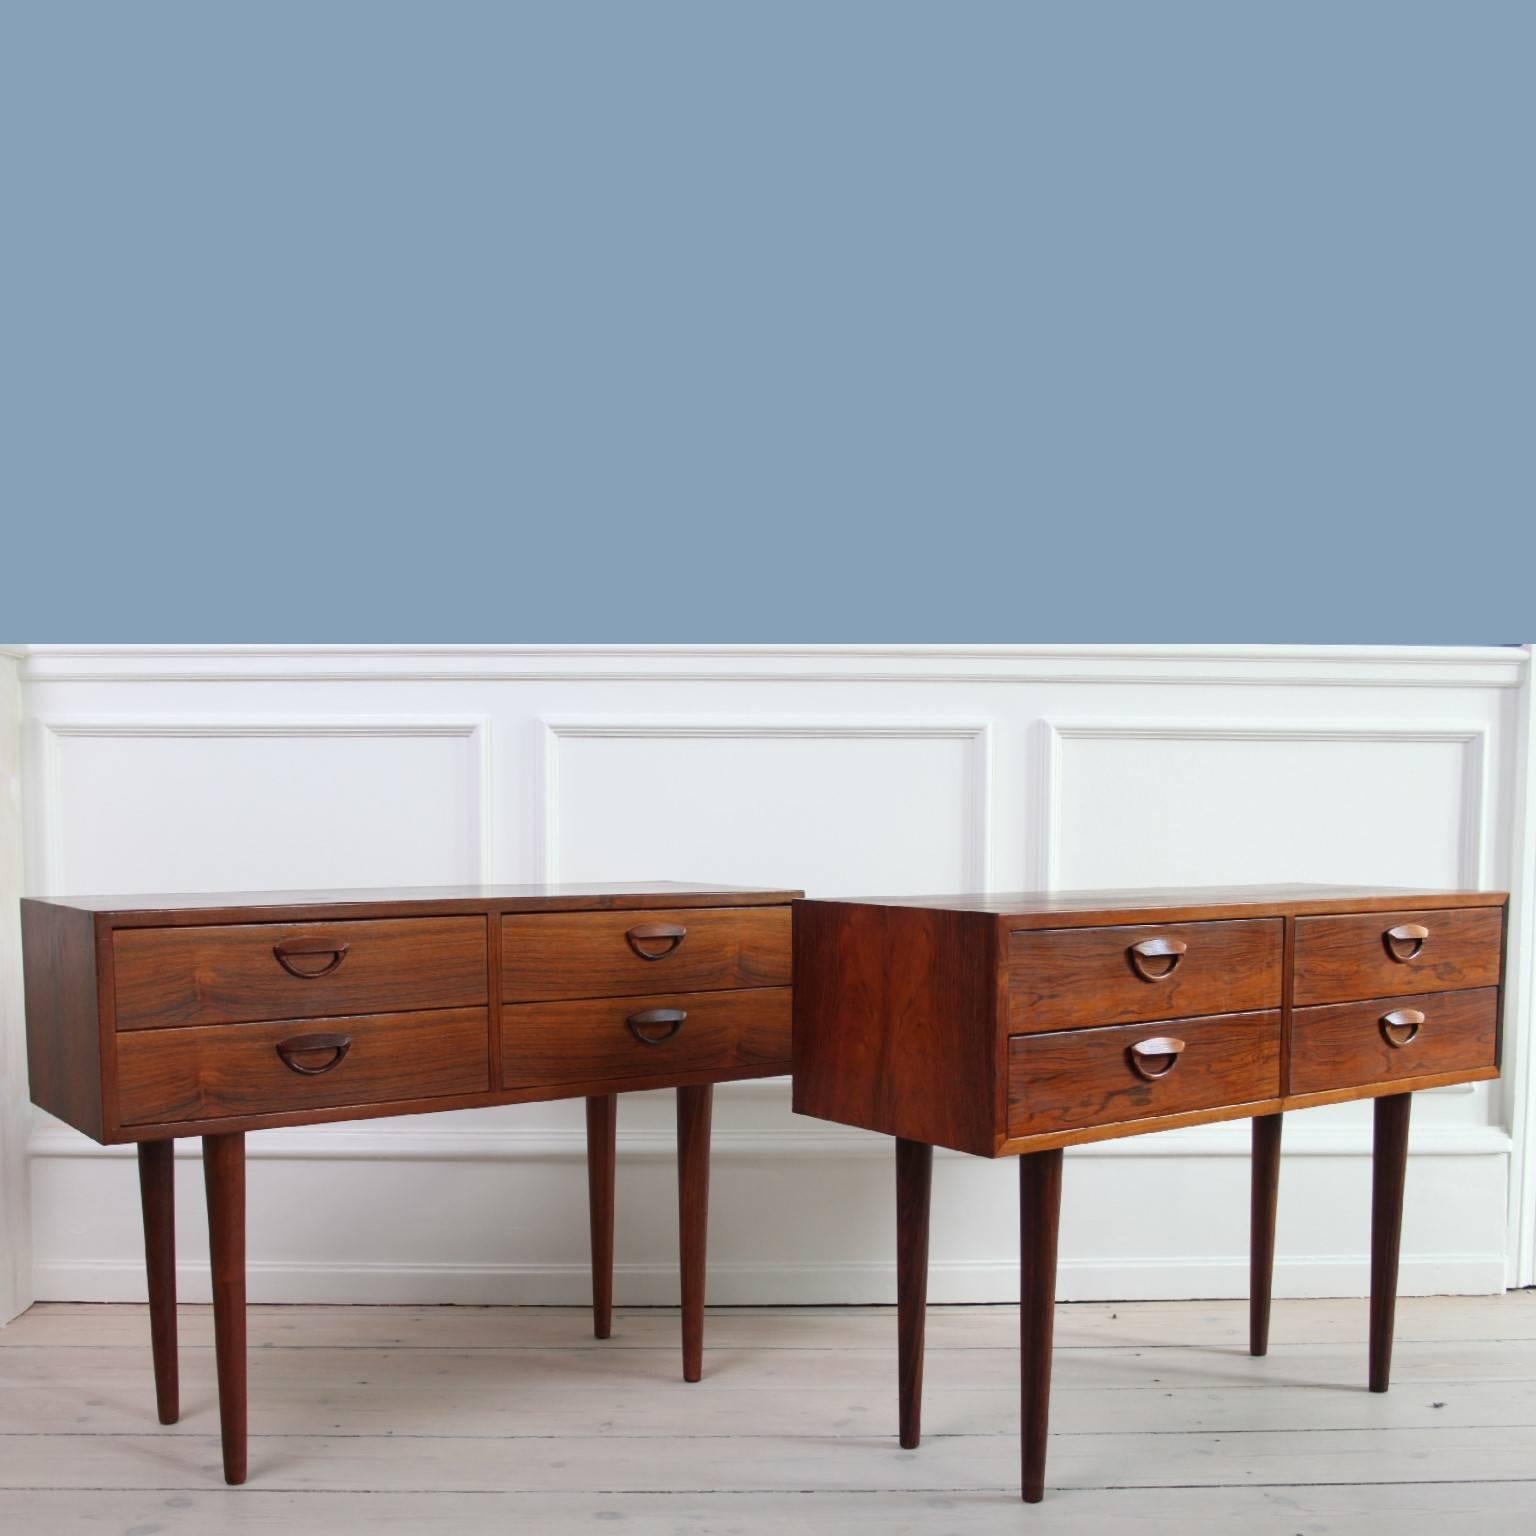 Pair of bedside tables designed by Kai Kristiansen.

Front with four drawers featuring sculpted handles.

Manufactured by Feldballes Furniture, 1960s.

Made of Brazilian rosewood.

Excellent original vintage condition.

CITES- certificate